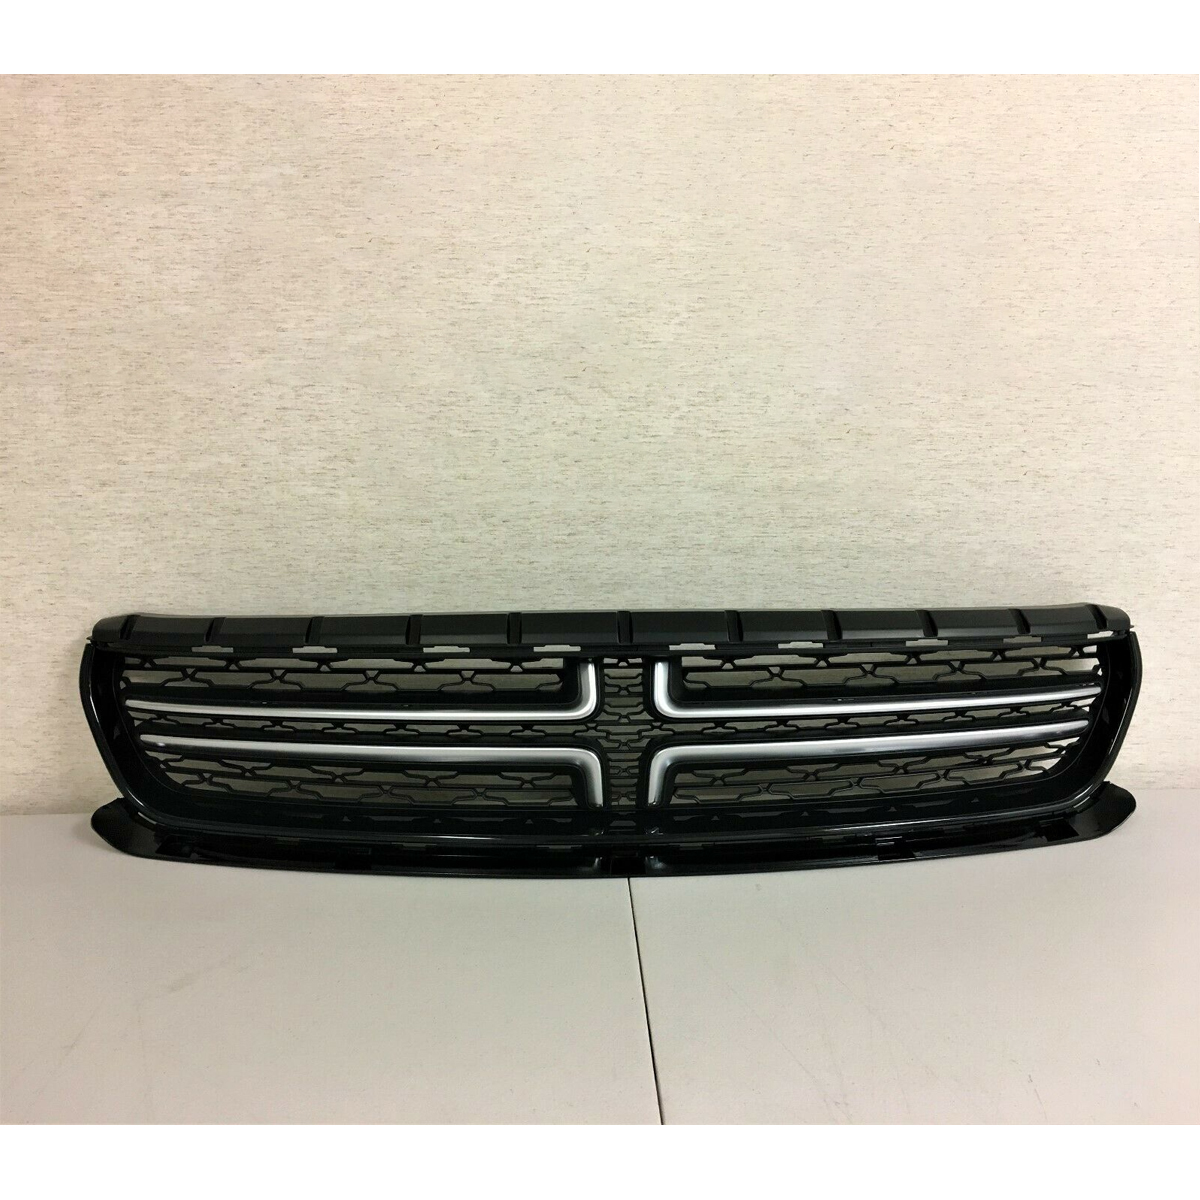 Black & Silver ABS Front Upper Bumper Grill Grille for Dodge Charger 2015-2018